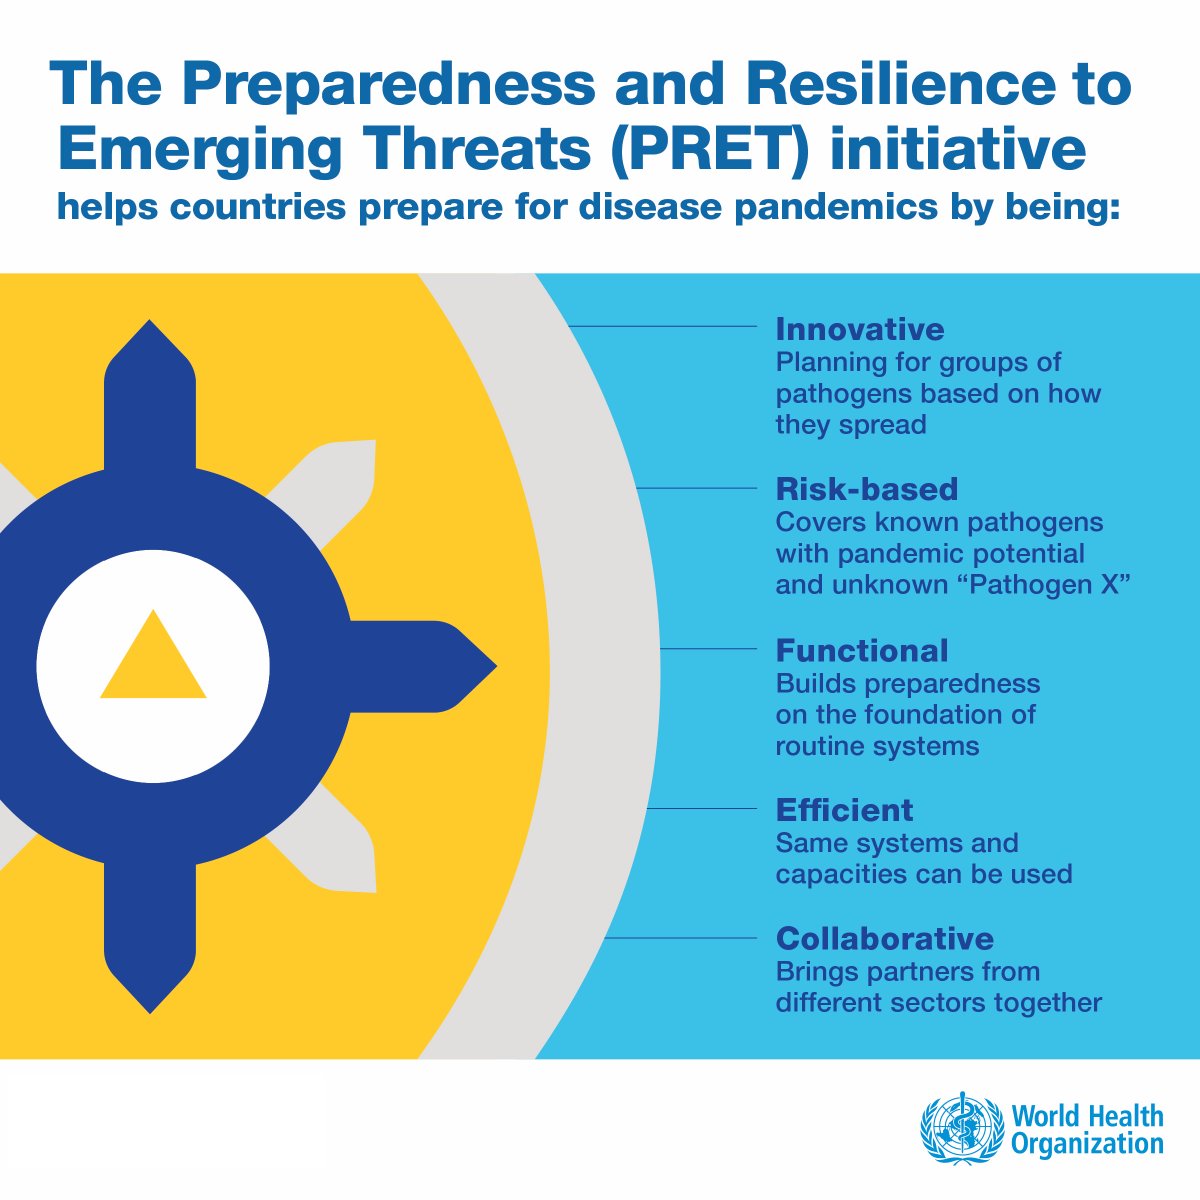 WHO has launched Preparedness and Resilience for Emerging Threats Initiative to help countries better prepare for future pandemics bit.ly/3Hhrtc2